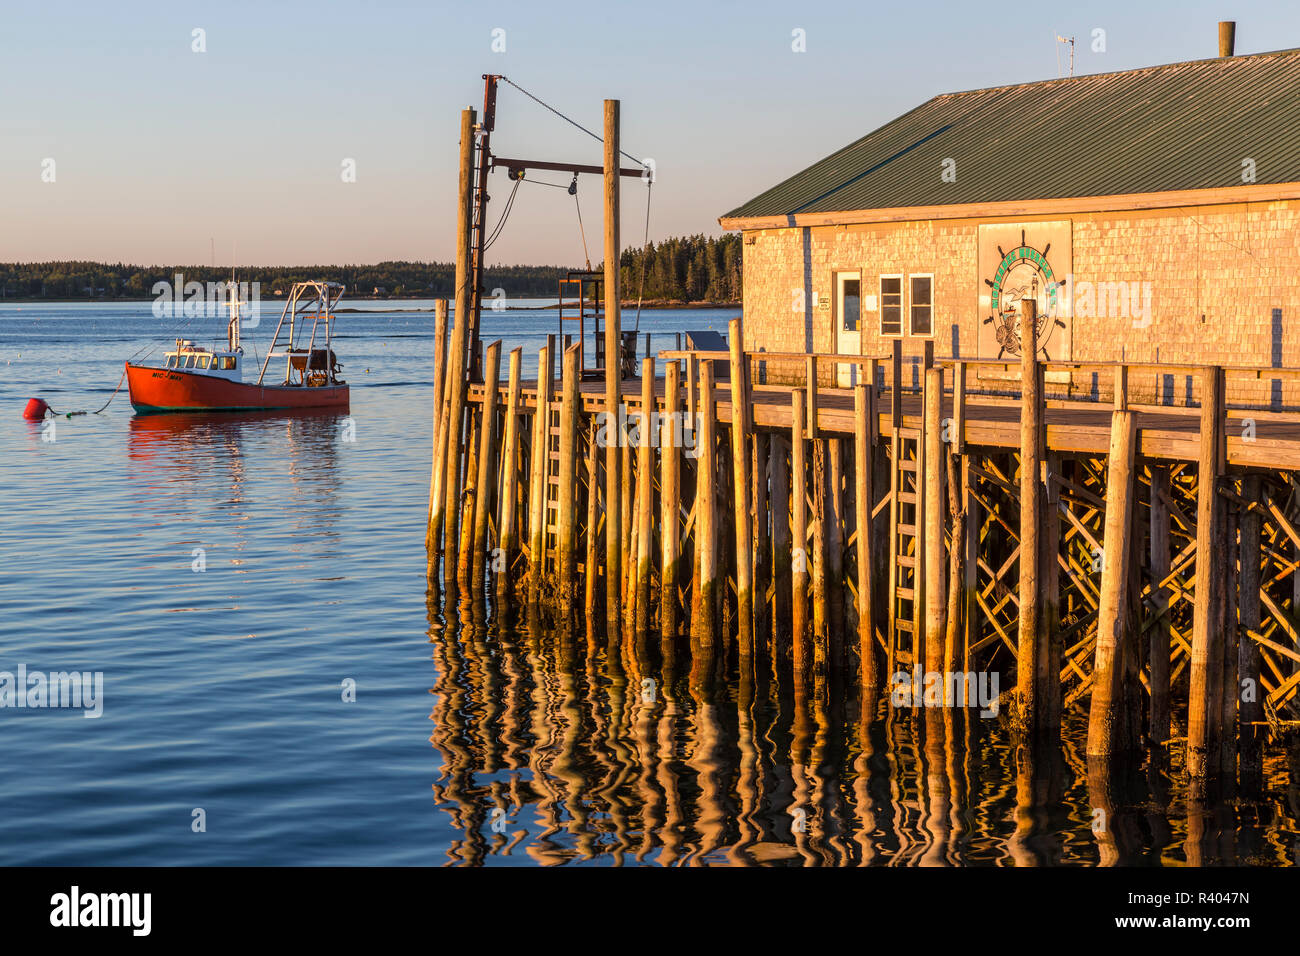 The dock and processing building at Moosabec Mussels in Jonesport, Maine. Owner Ralph Smith's mussel harvesting boat is in the distance. Stock Photo